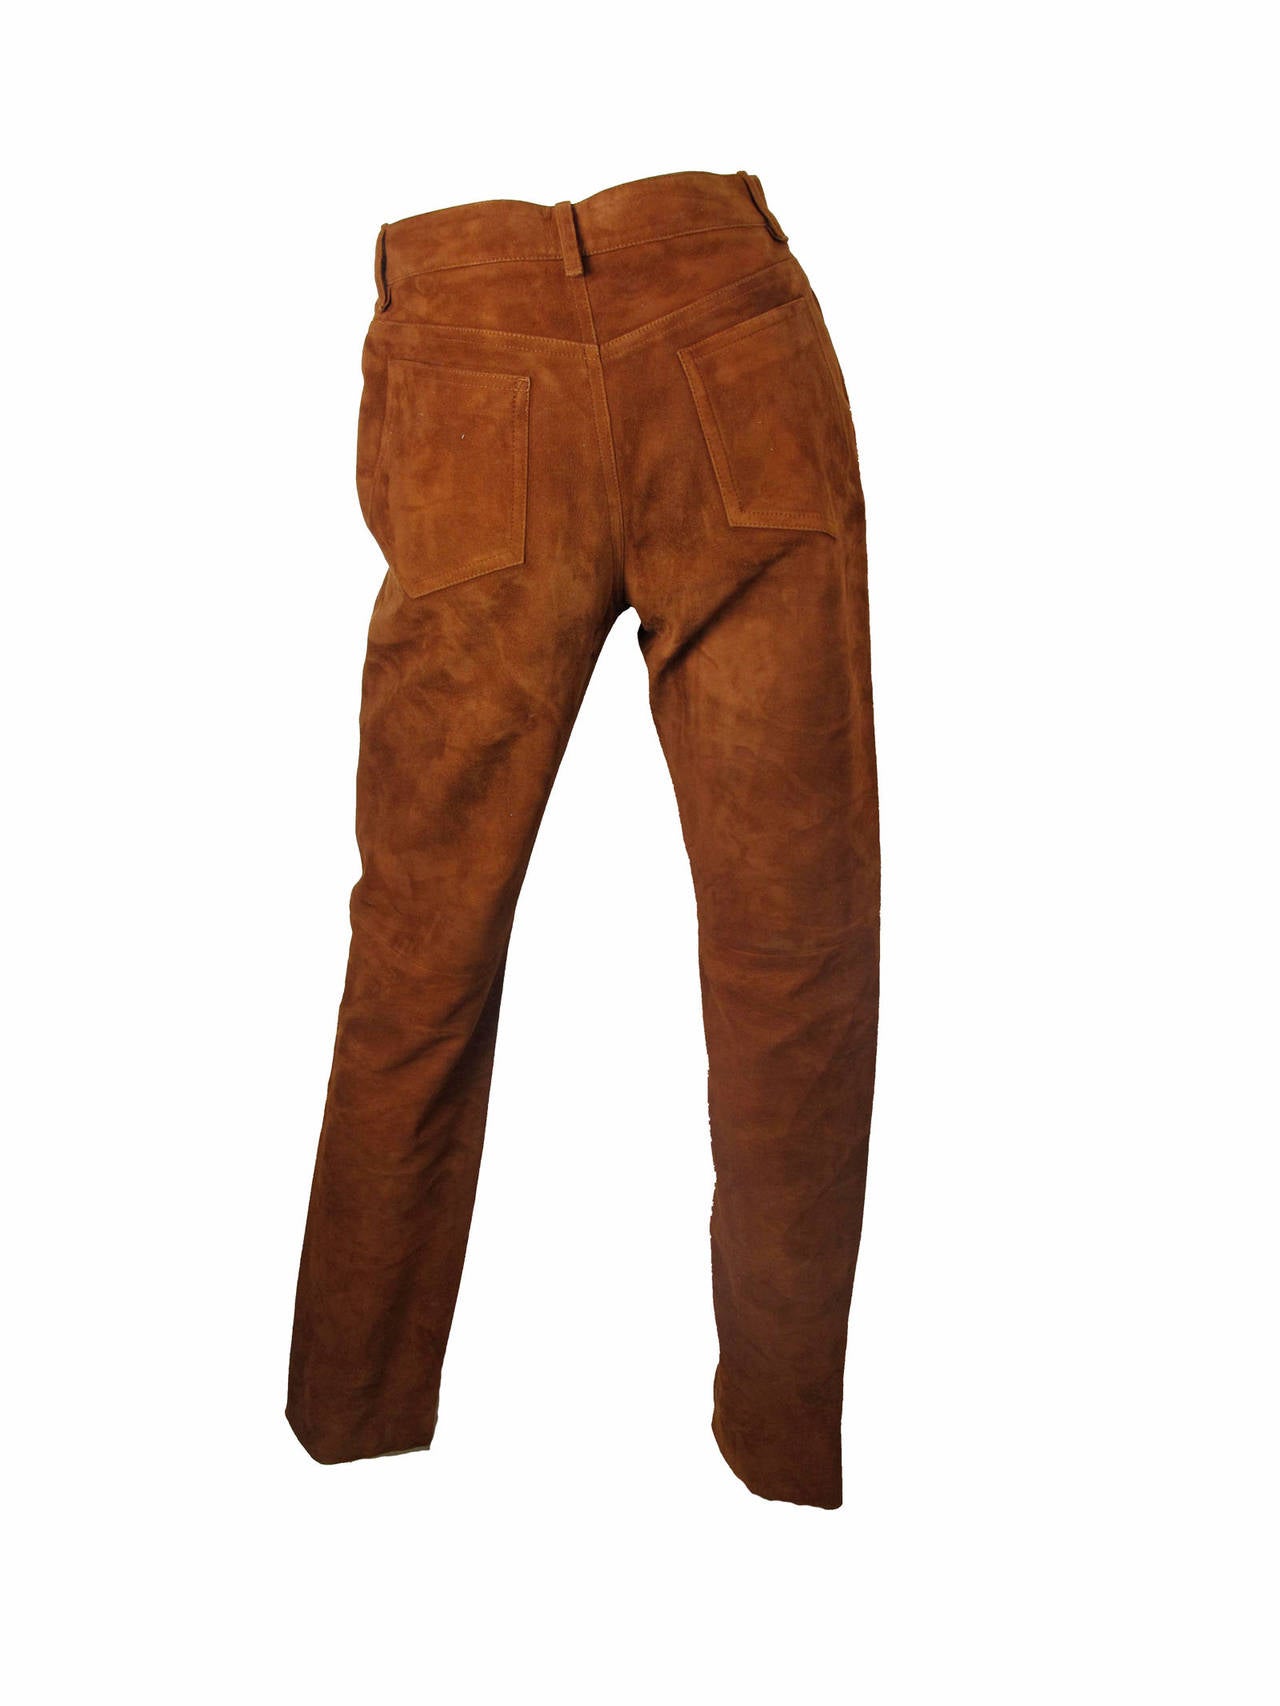 Hermes suede soft lambskin pants.  Hermes Paris button and rivets. Two front pockets and two back pockets.  29" waist, 40" hips, 30 1/2" inseam, 41 1/2" 

Condition: This garment has been previously worn, there is some all over